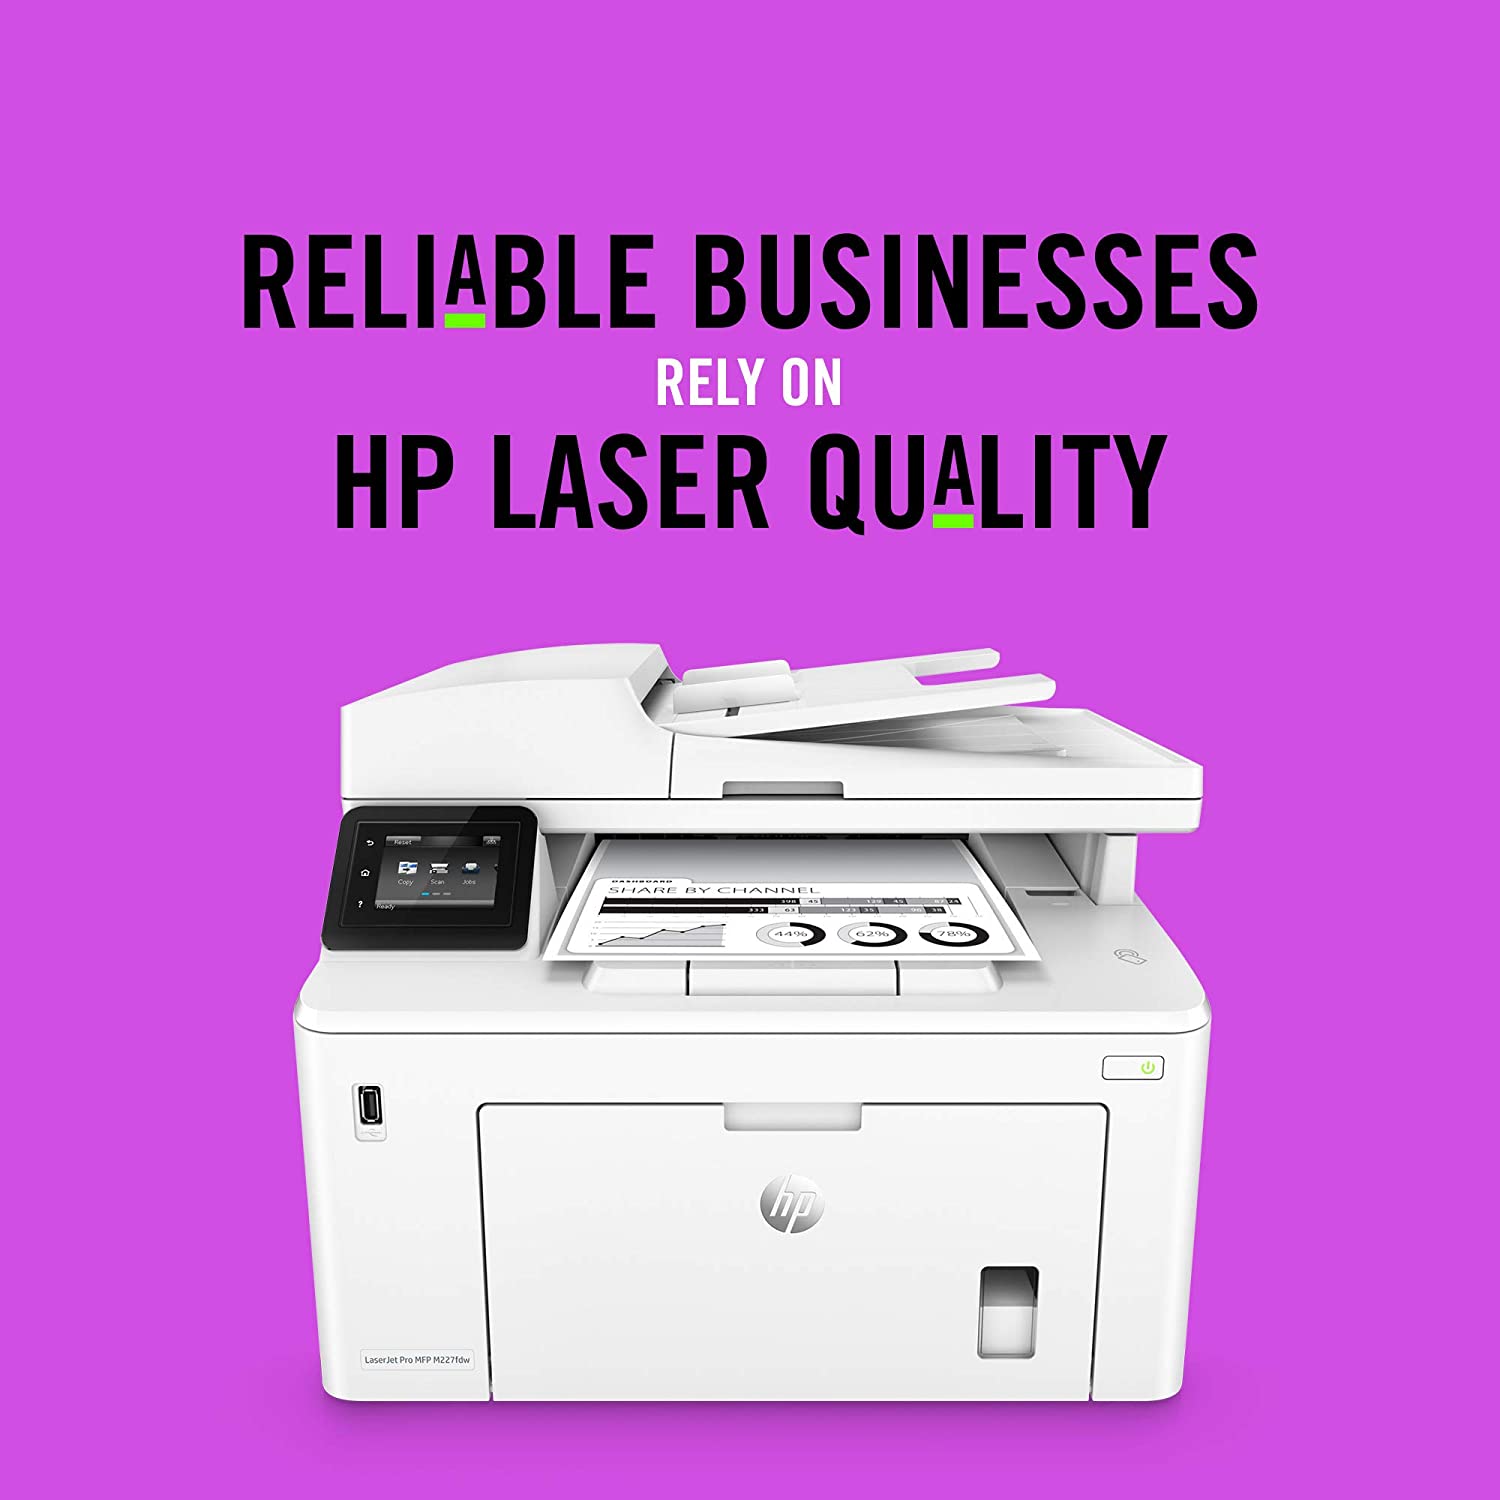 HP LaserJet Pro M227fdw Black-and-White All-in-One Wireless Laser Printer (G3Q75A) Print, Scan, Copy, Fax With DE USB Cable and File Folders - image 4 of 9